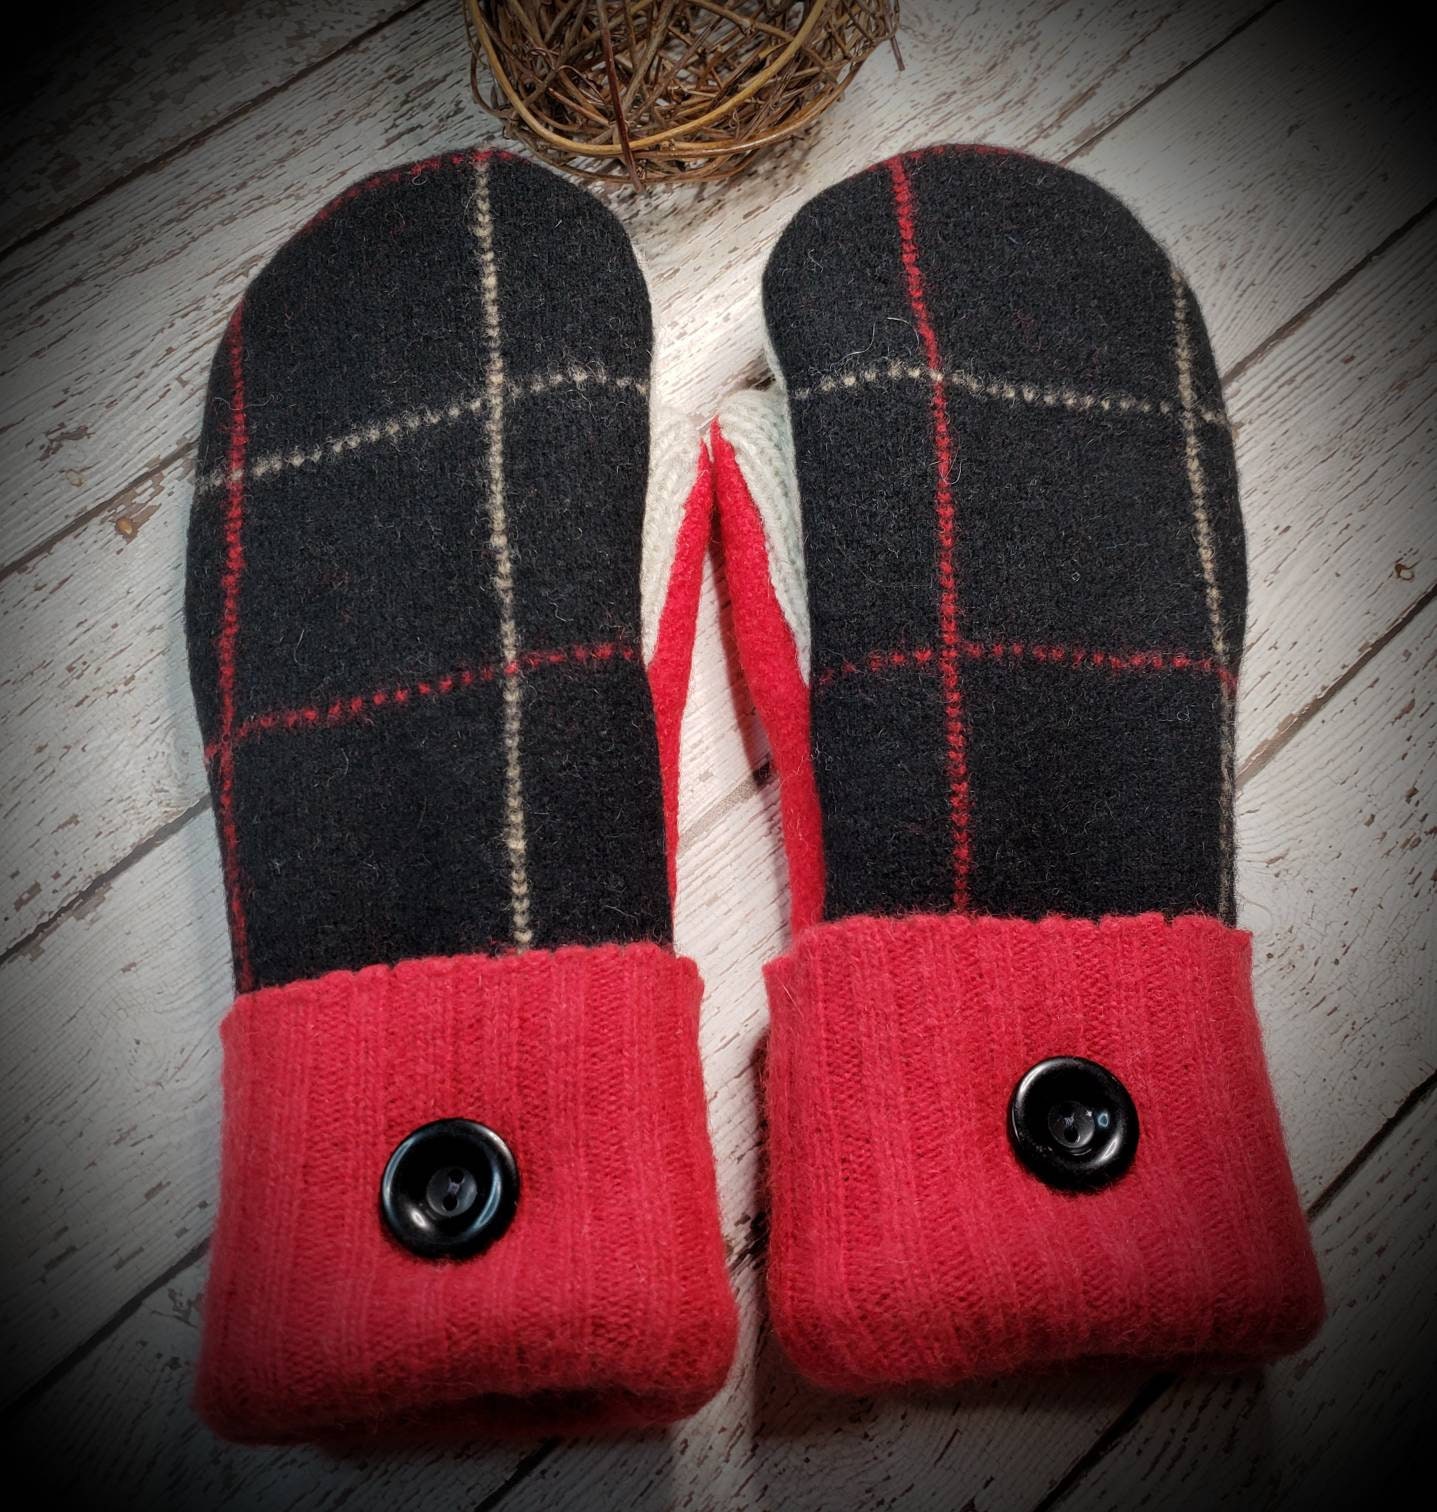 Accessories Gloves & Mittens Mittens & Muffs Recycled Felted Wool Sweater Mittens-Red Charcoal Stripe Wool Mittens Upcycled Wool Mittens Super Warm-Accessories-Stocking Stuffers 